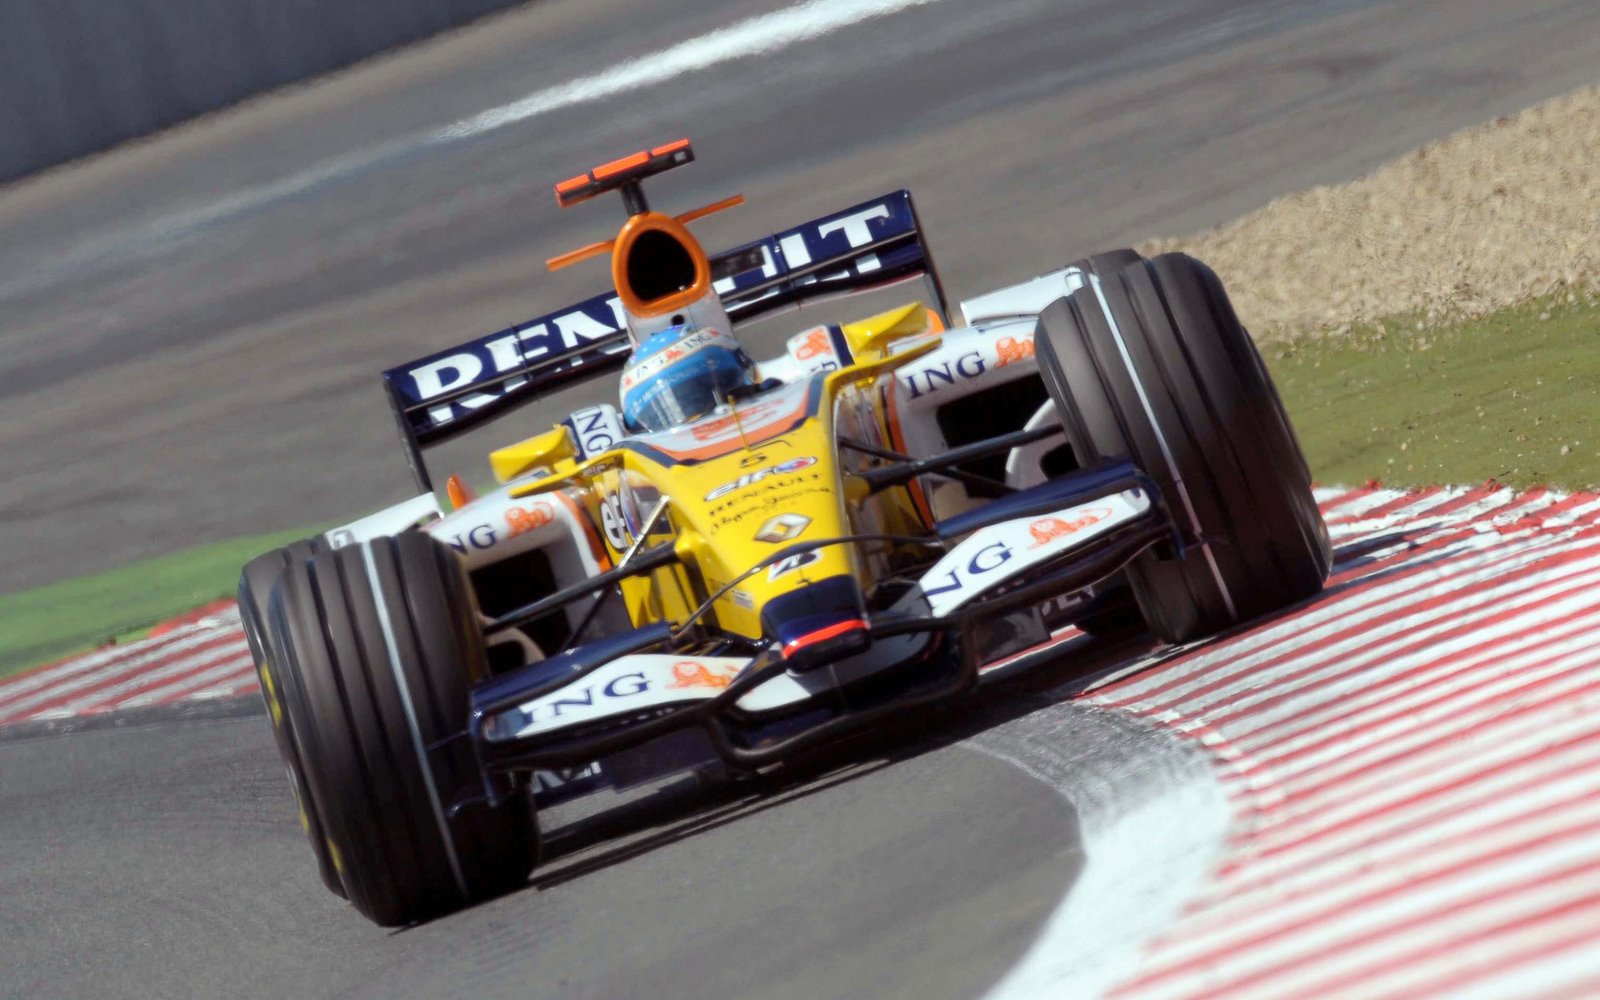 [Fernando+Alonso+Renault+Saturday+Qualifying+session+France+Magny+Cours,+F1+2008++27.jpg]